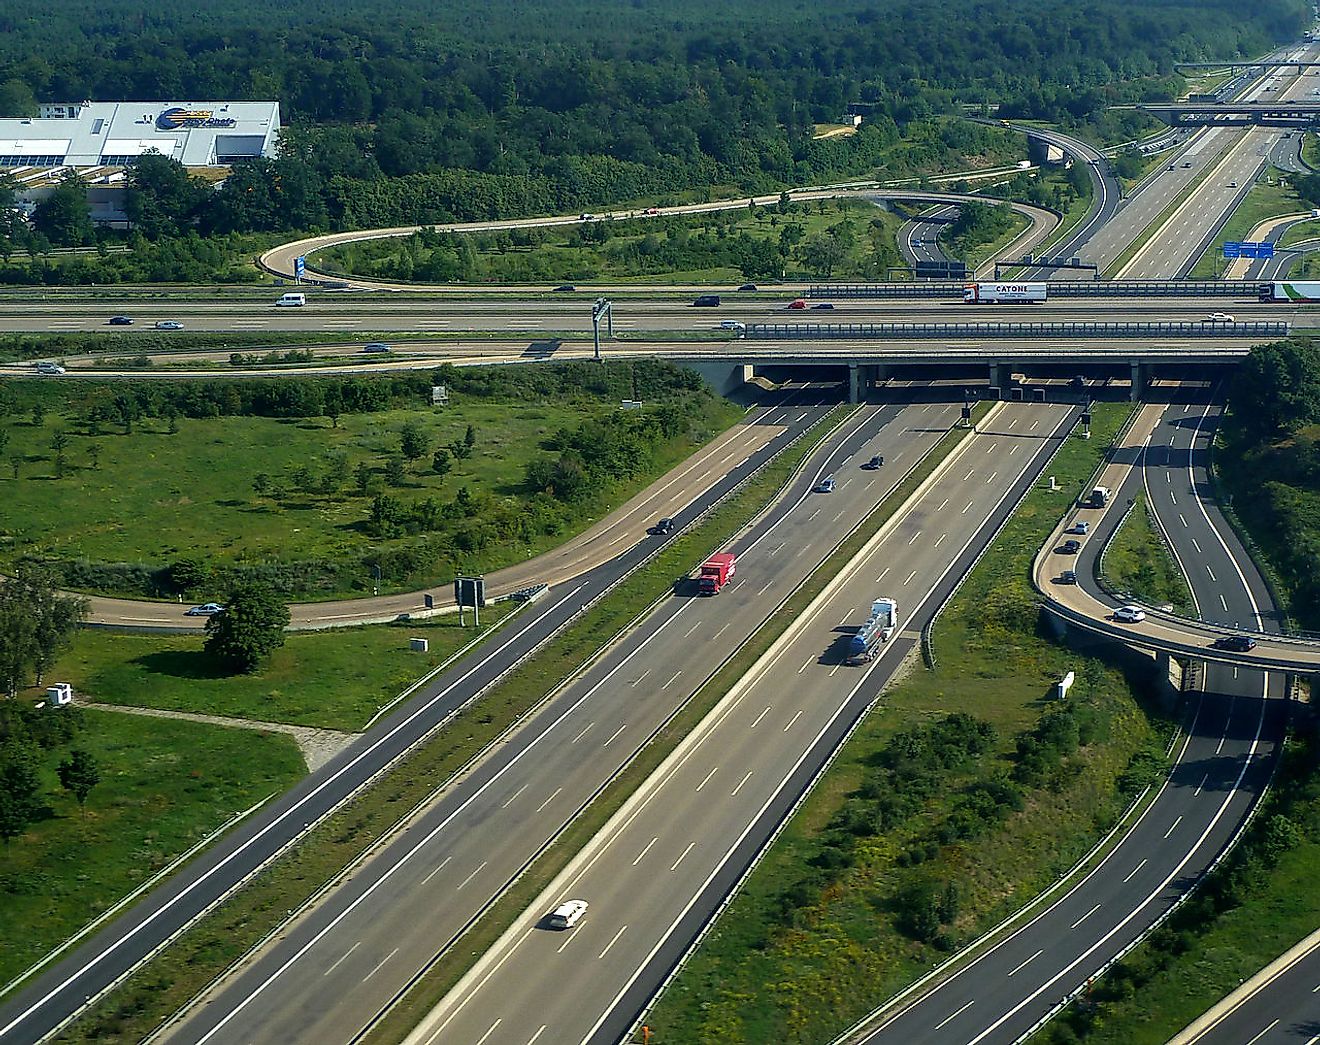 The Autobahn is the federal controlled-access highway system in Germany. 